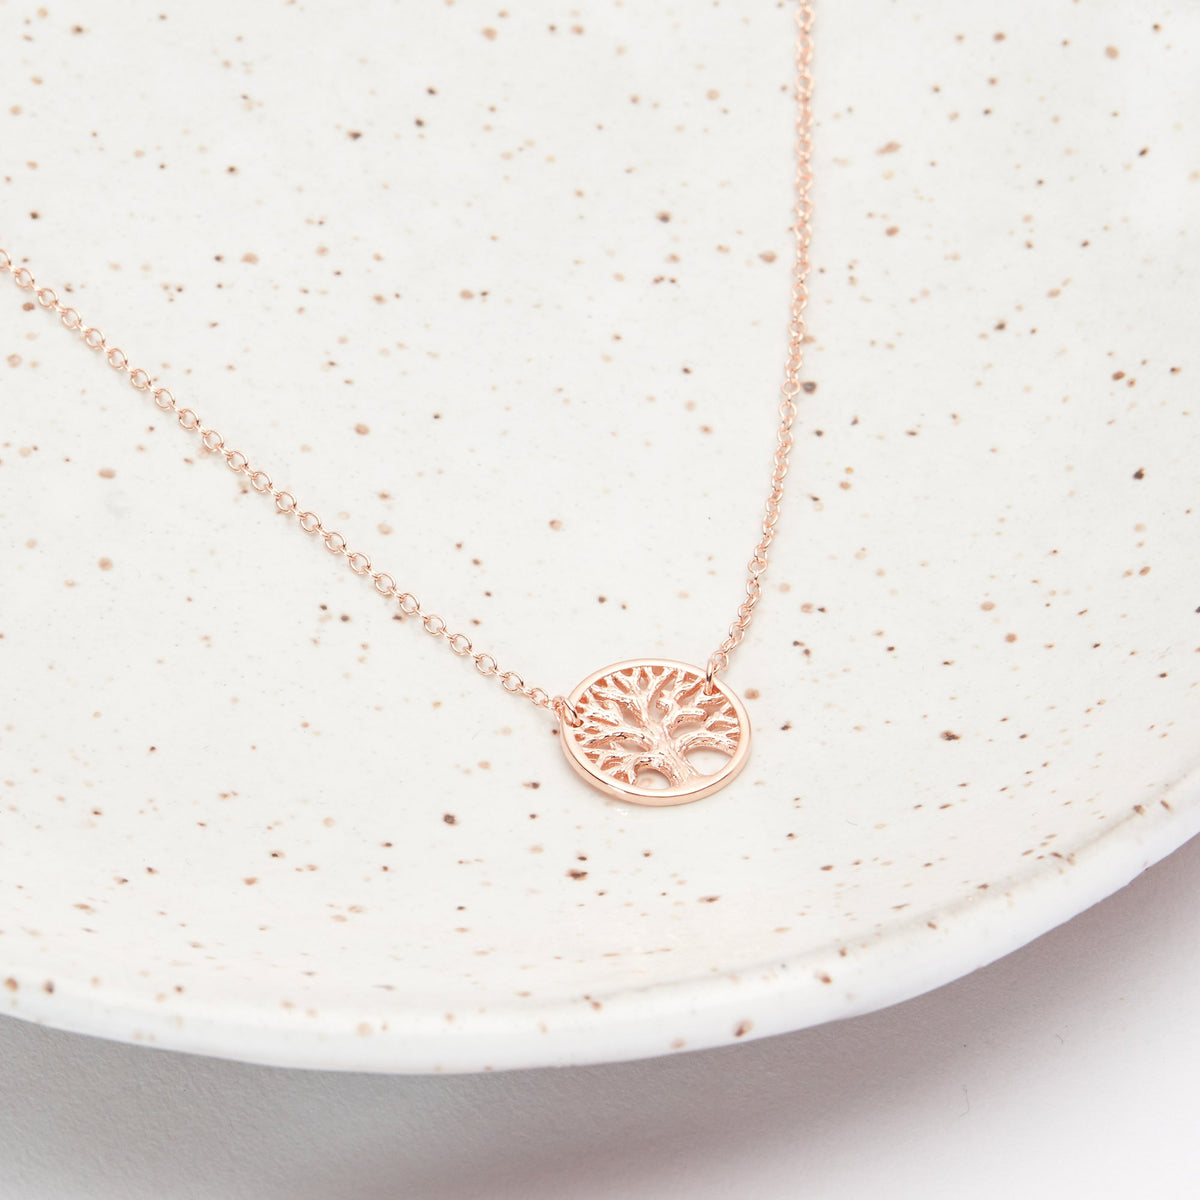 30th Birthday Necklace - Dear Ava, Jewelry / Necklaces / Pendants